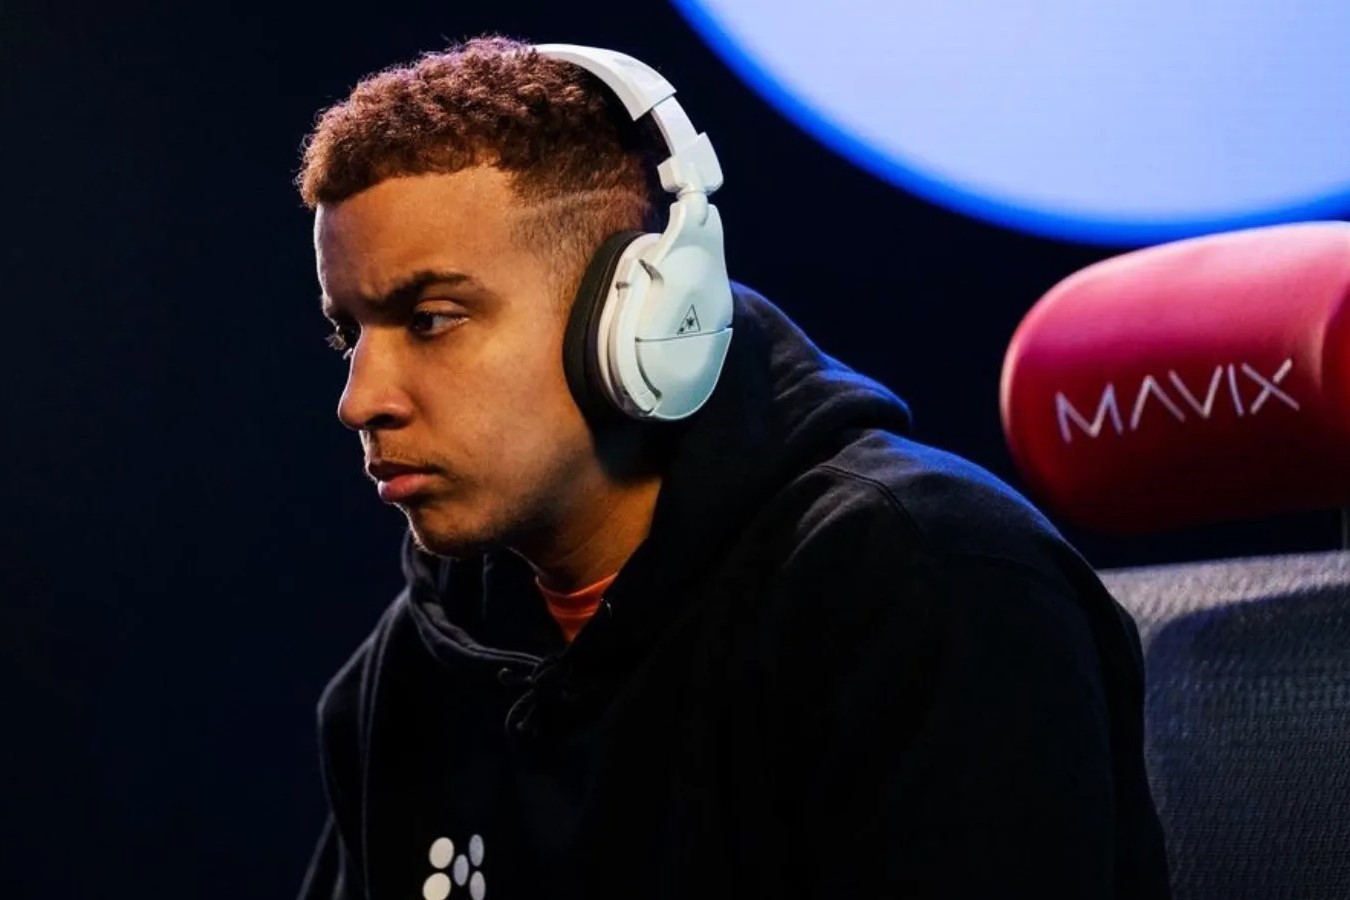 Faze Swagg’s Choice: A Look At His Gaming Headset